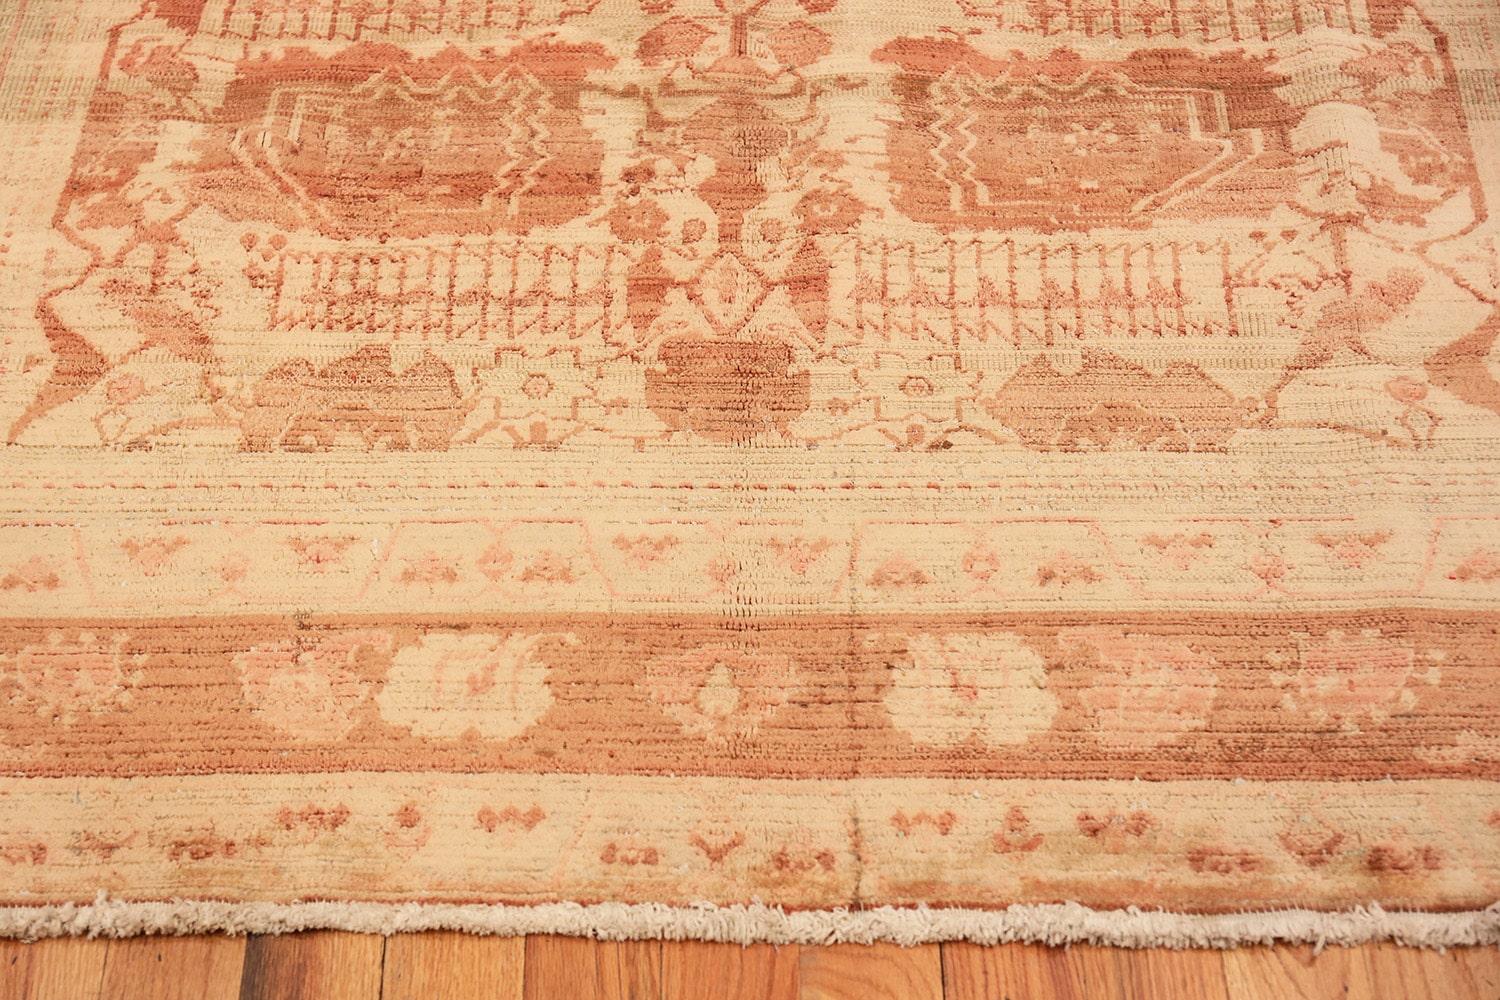 Tapis ancien d'Agra, pays d'origine / type de tapis : Inde, date circa 1920. Taille : 5 ft 10 in x 8 ft 7 in (1+2=8]).